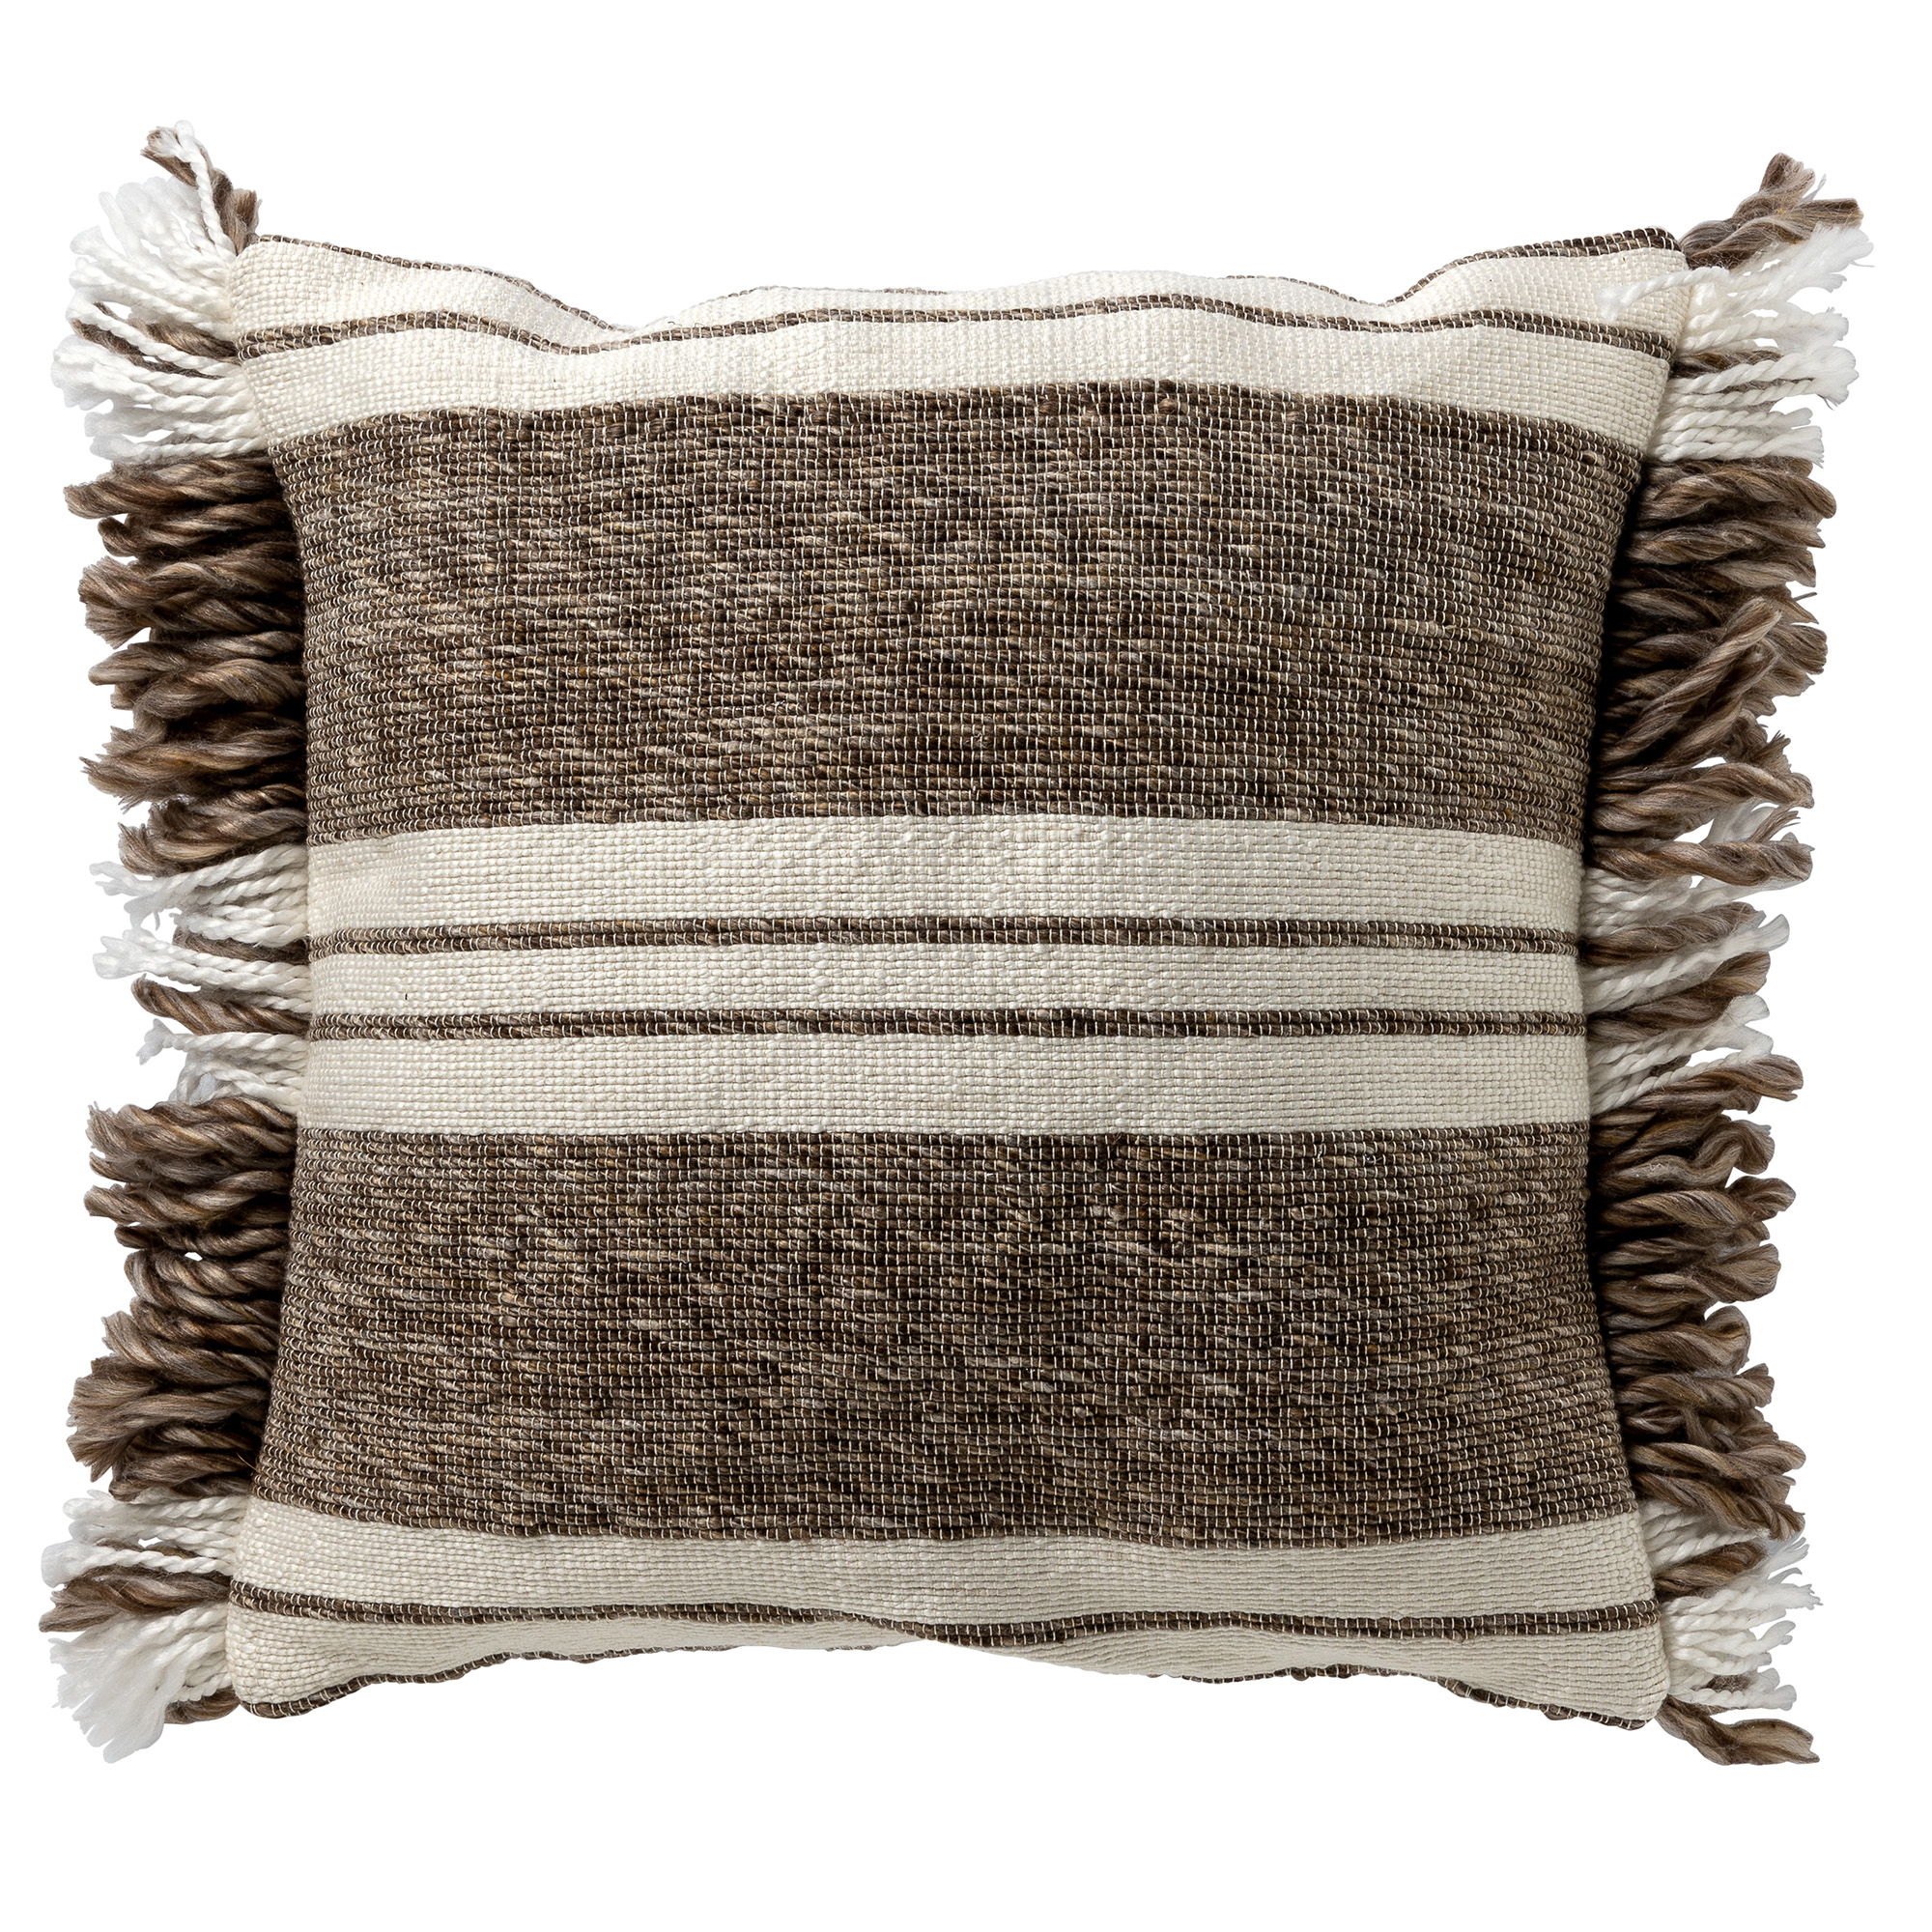 EDGAR - Cushion cover 45x45 cm 85% recycled polyester - Eco Line collection - Driftwood - taupe